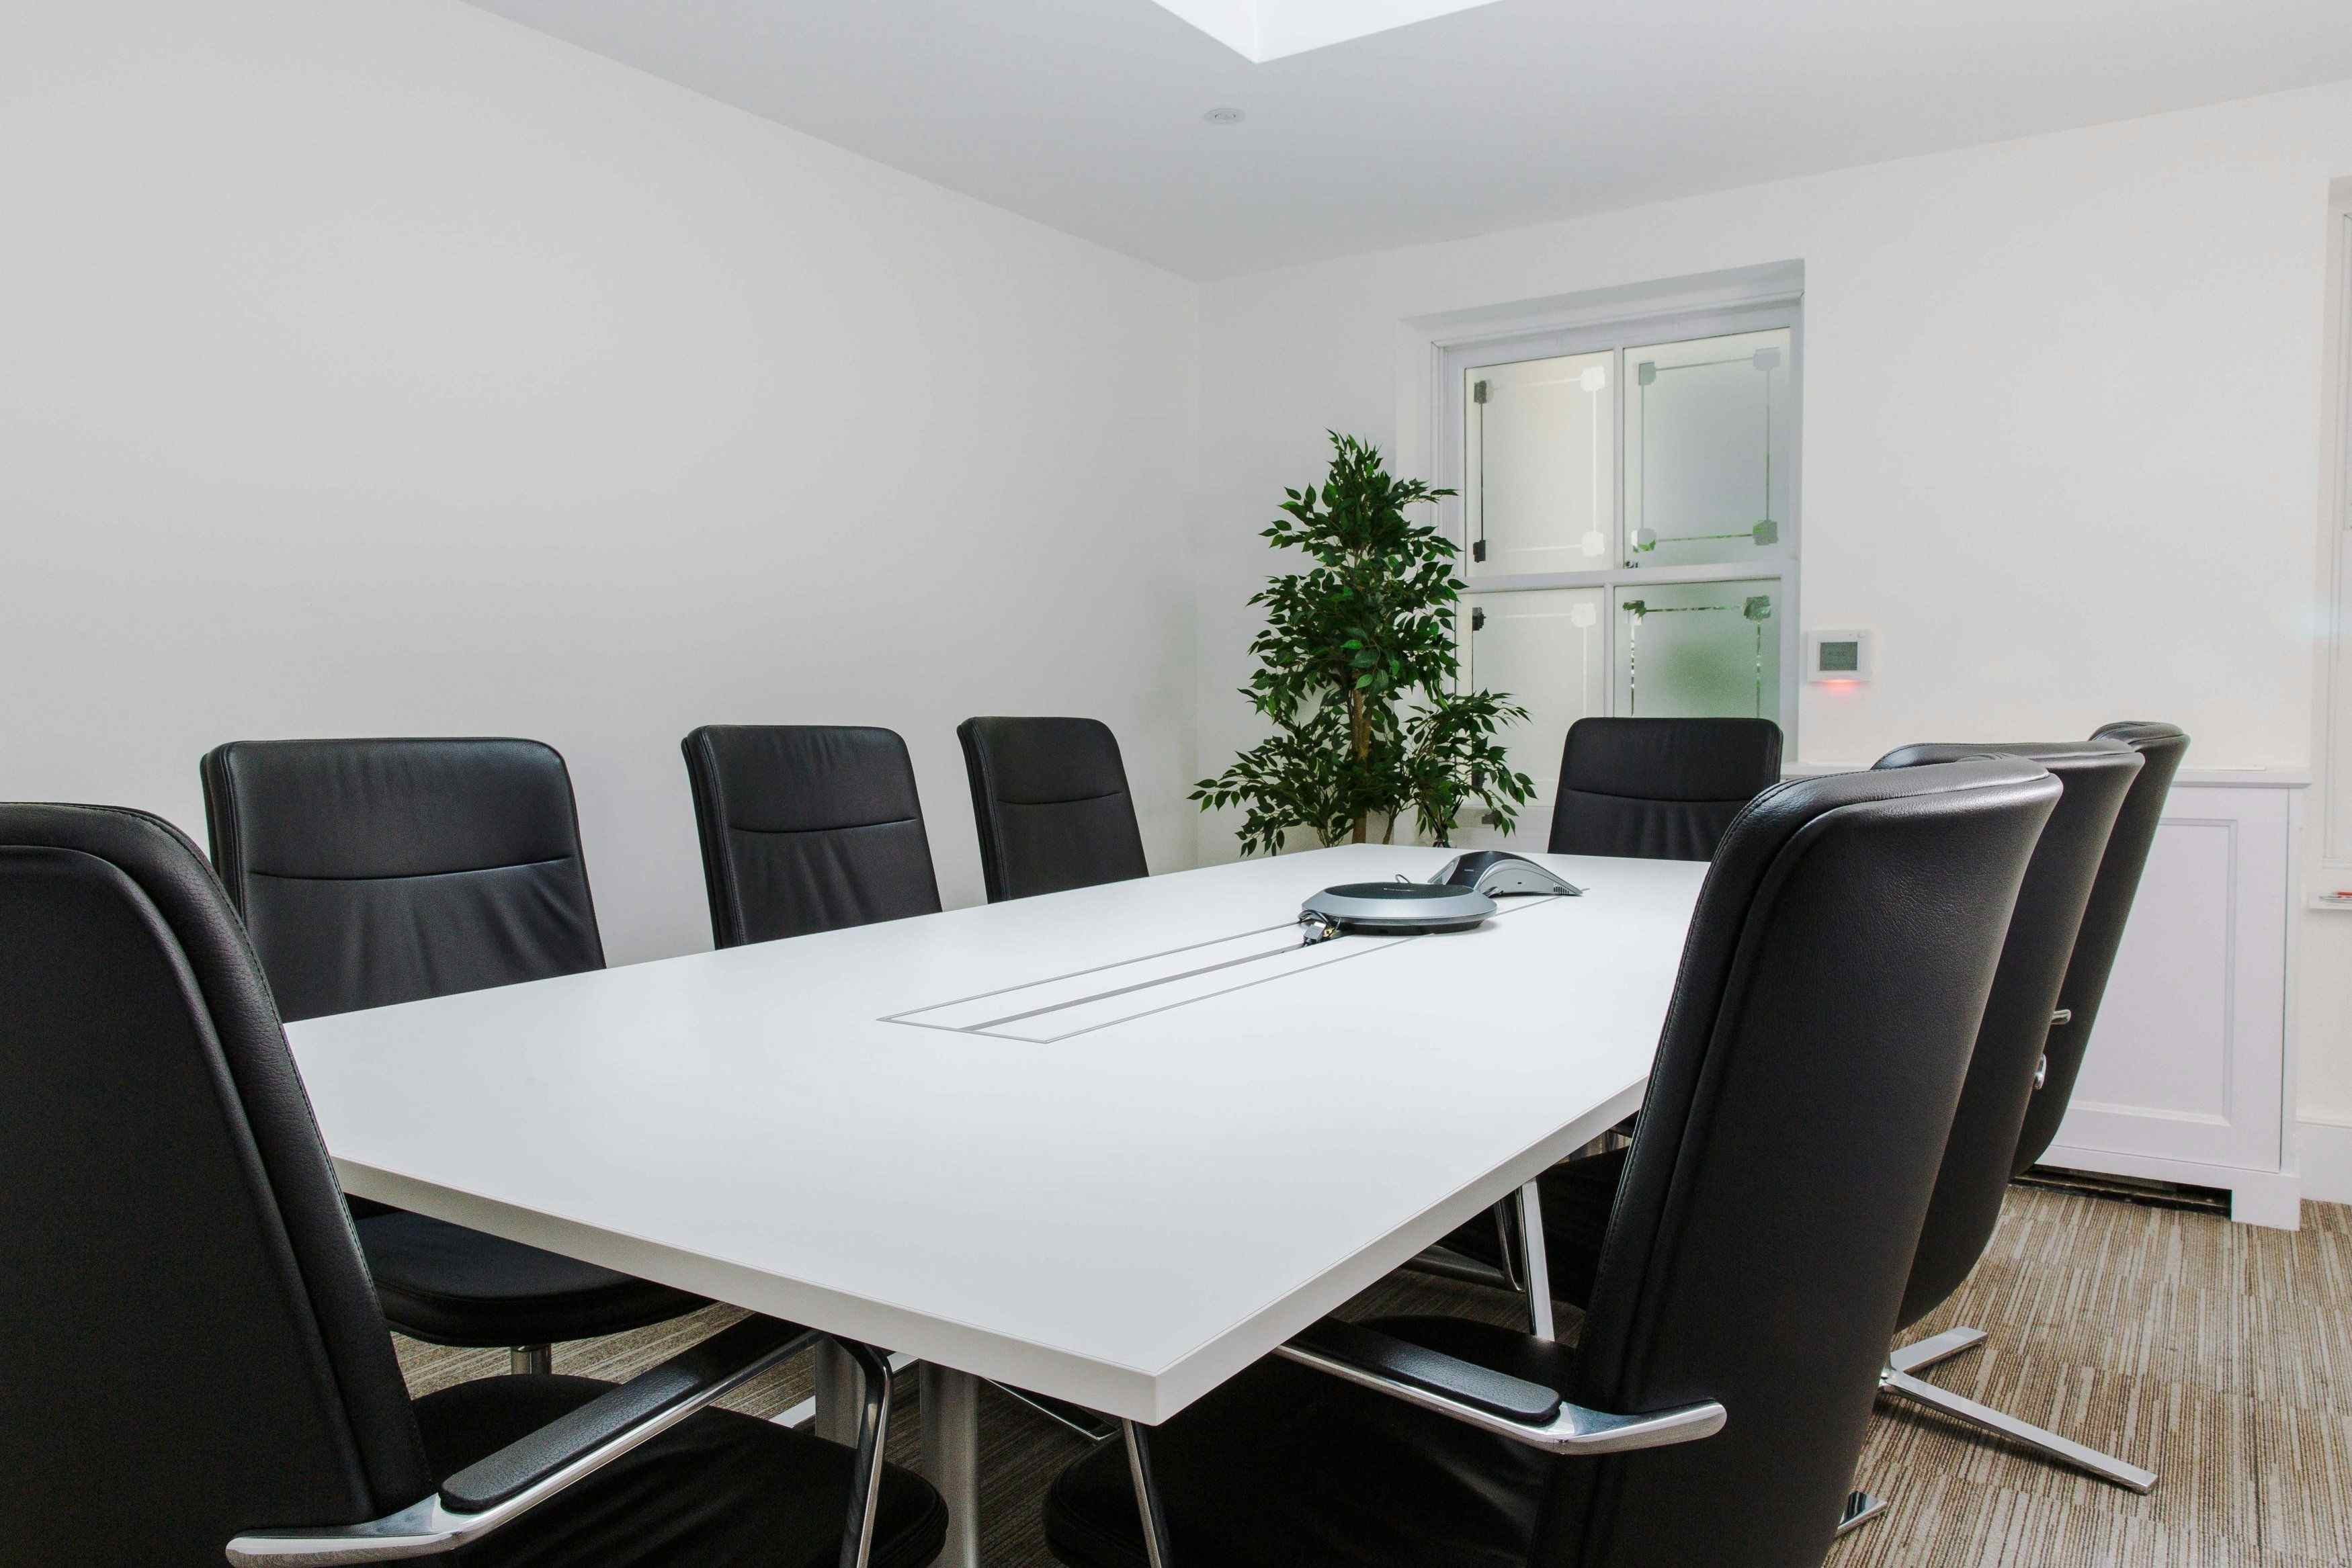 Wigmore Street Meeting Room, 128 Wigmore Street